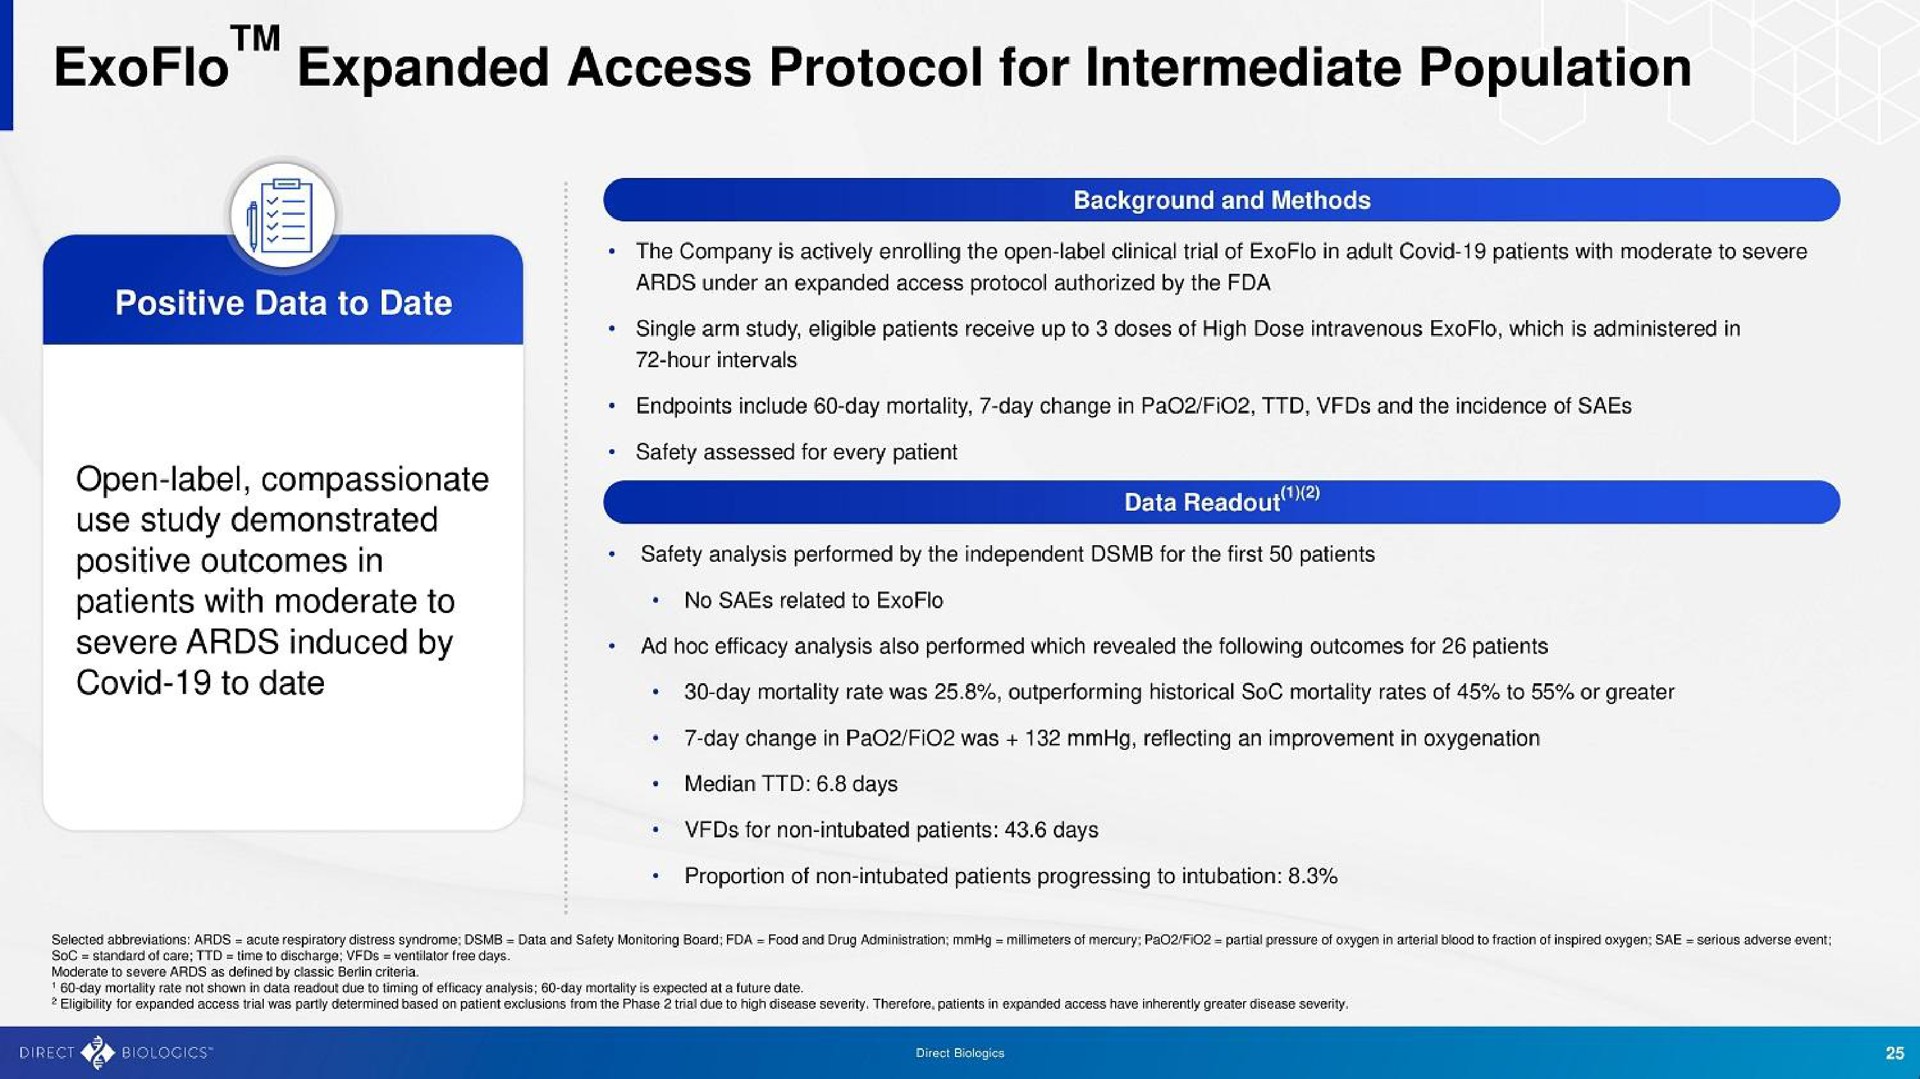 expanded access protocol for intermediate population | Direct Biologics